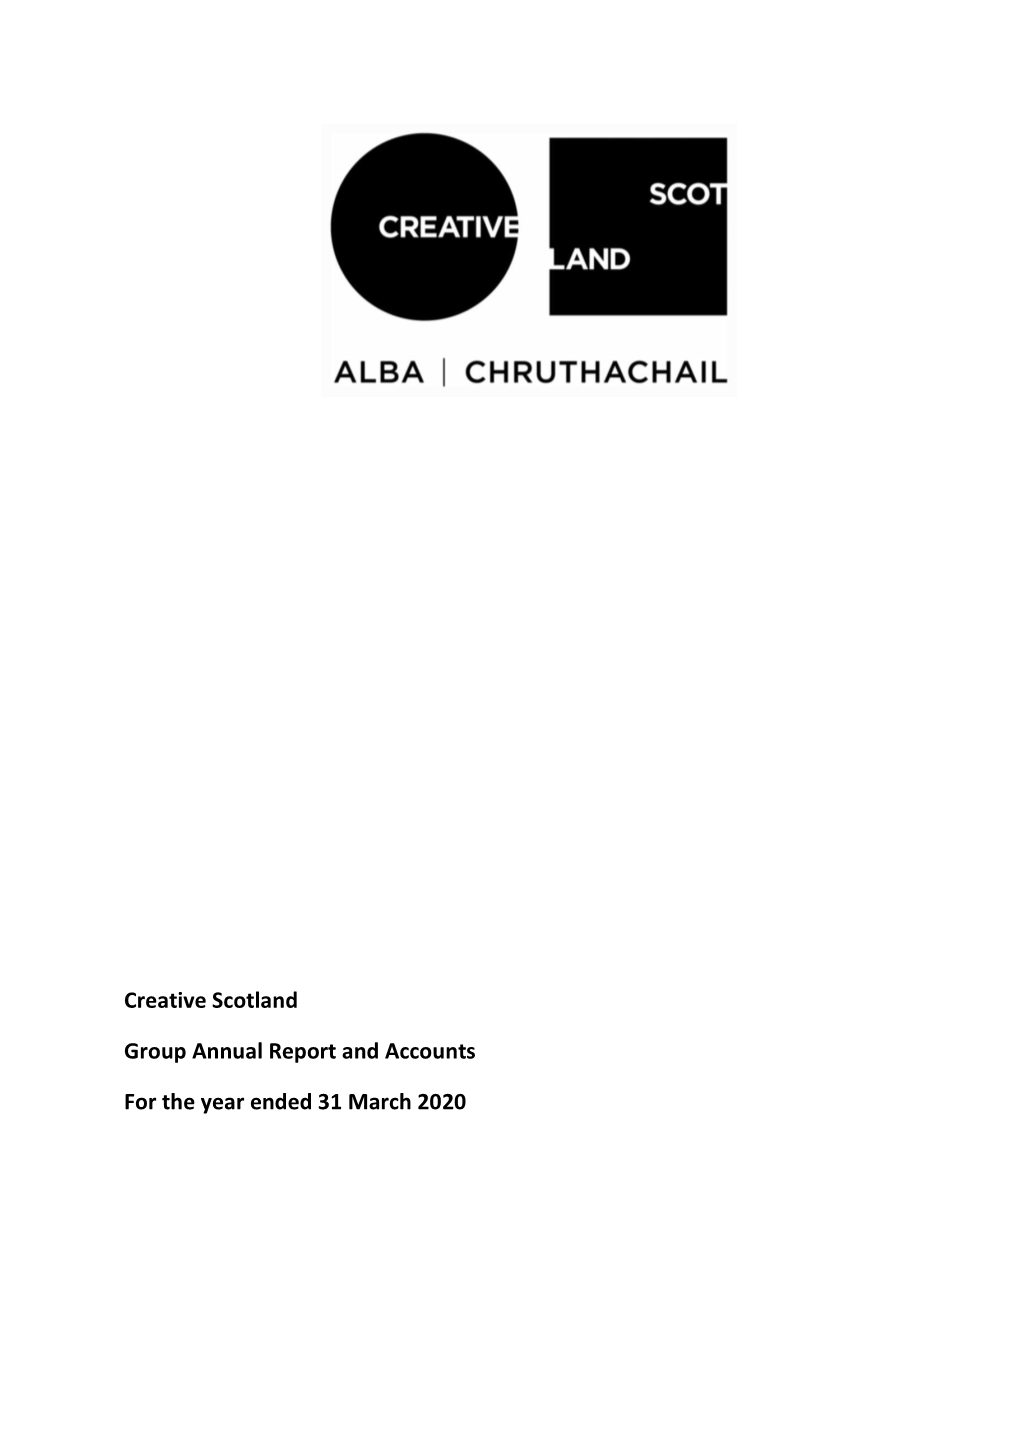 Creative Scotland Group Annual Report and Accounts for the Year